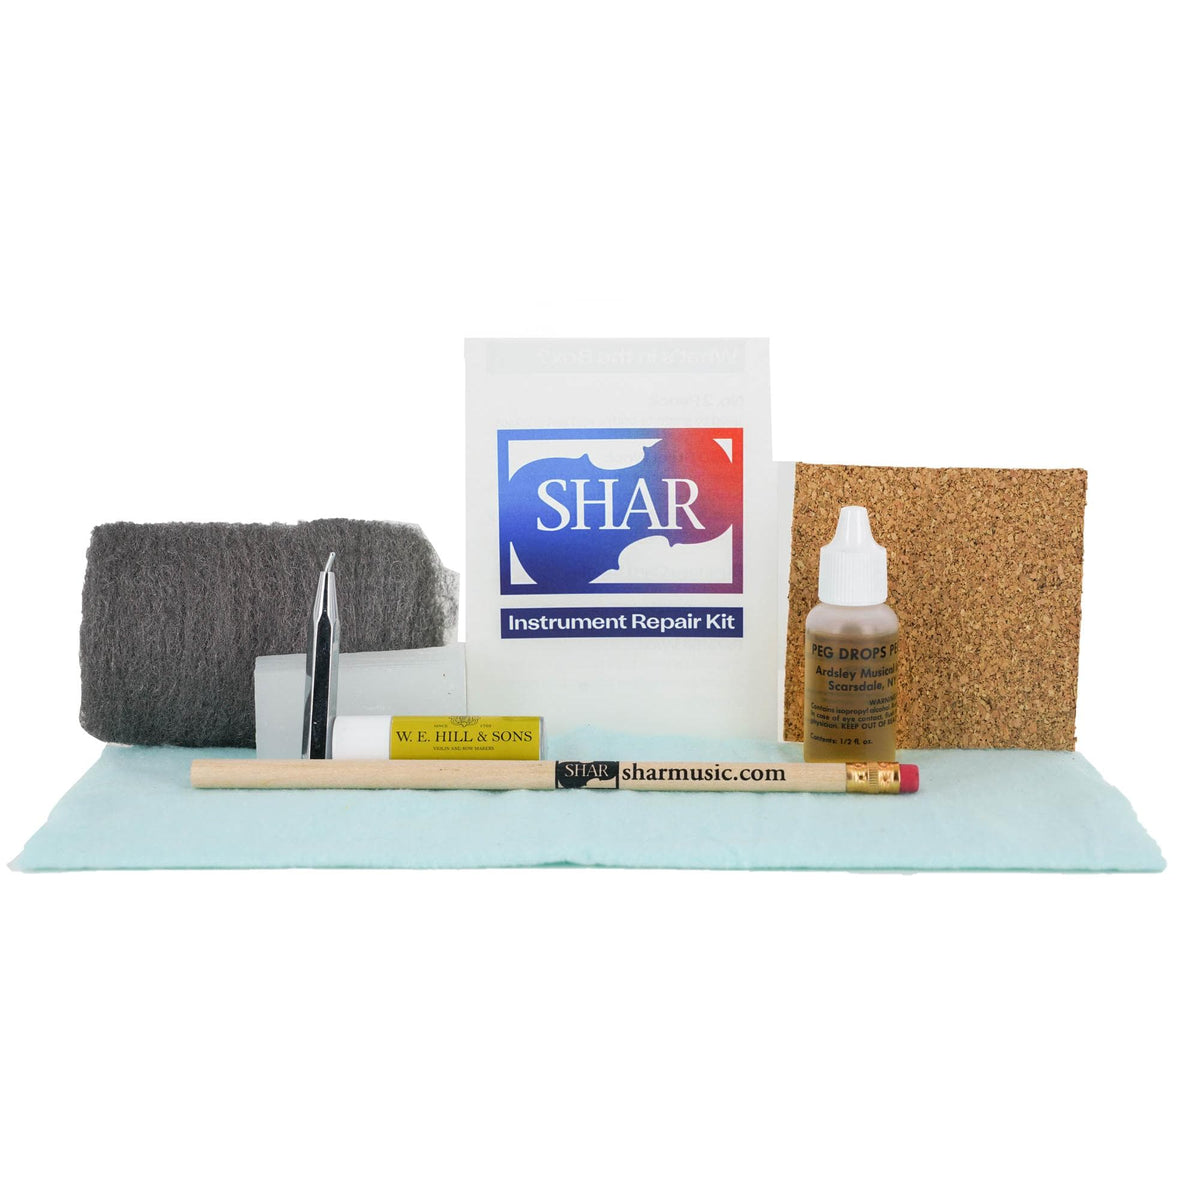 Instrument Repair Kit for Teachers with Peg Compound, Peg Drops, Cloth, Paraffin Wax, Steel Wool, Pencil, Chinrest Cork, and Chinrest Wrench